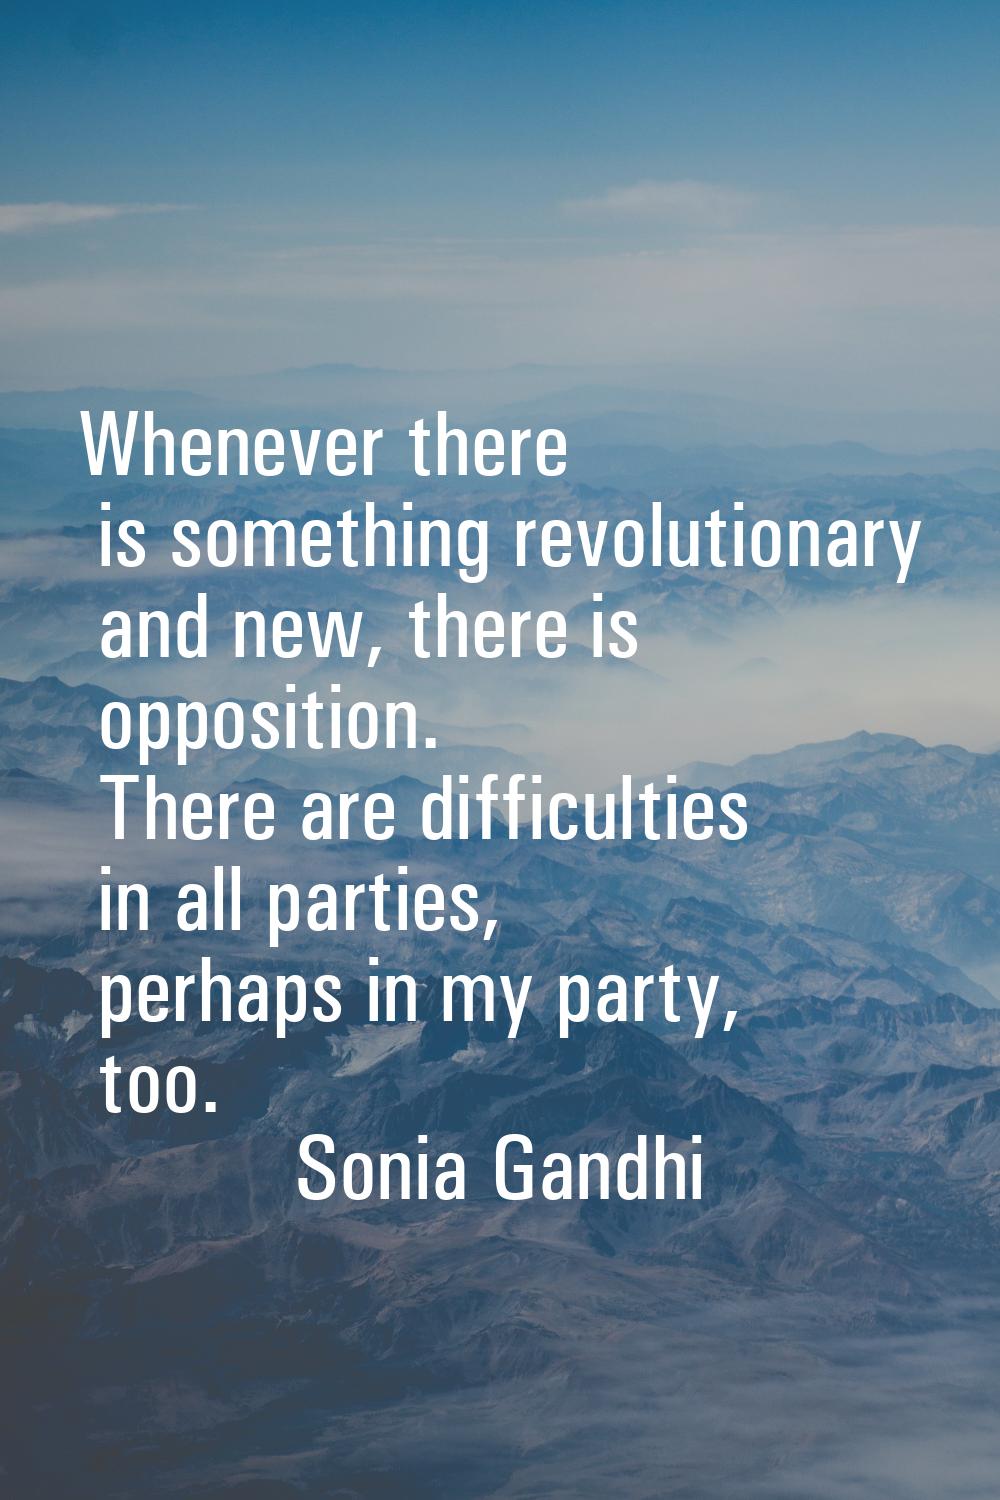 Whenever there is something revolutionary and new, there is opposition. There are difficulties in a